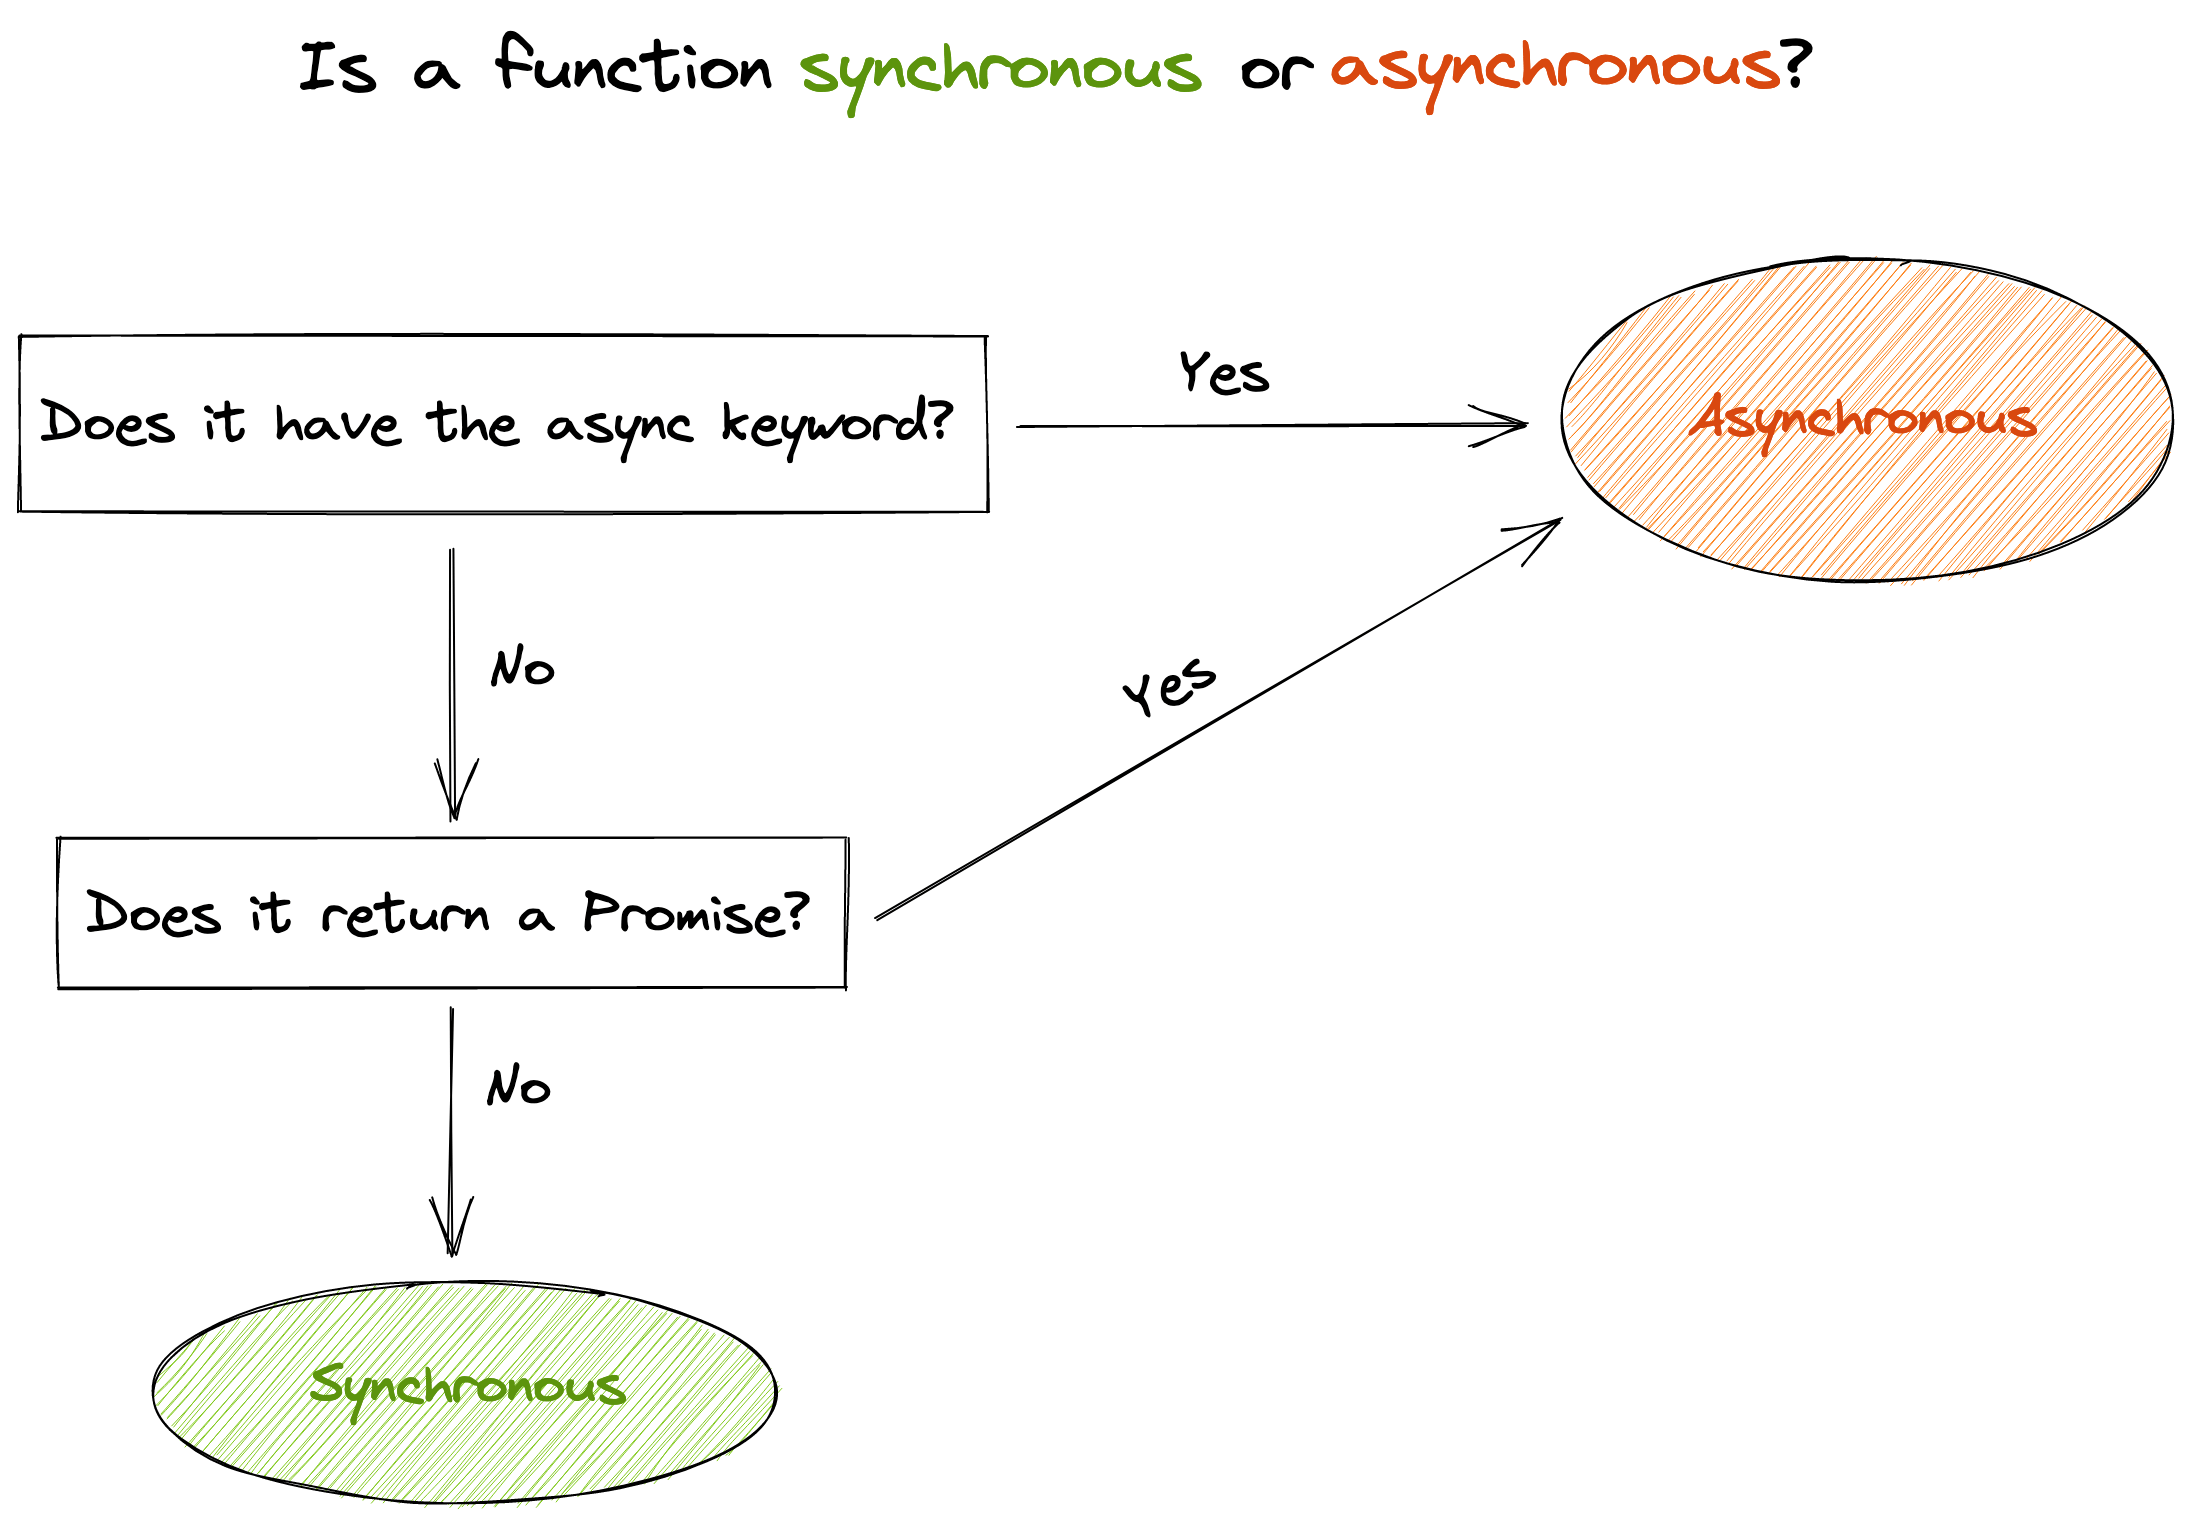 Decision tree to determine whether a function is synchronous or asynchronous.